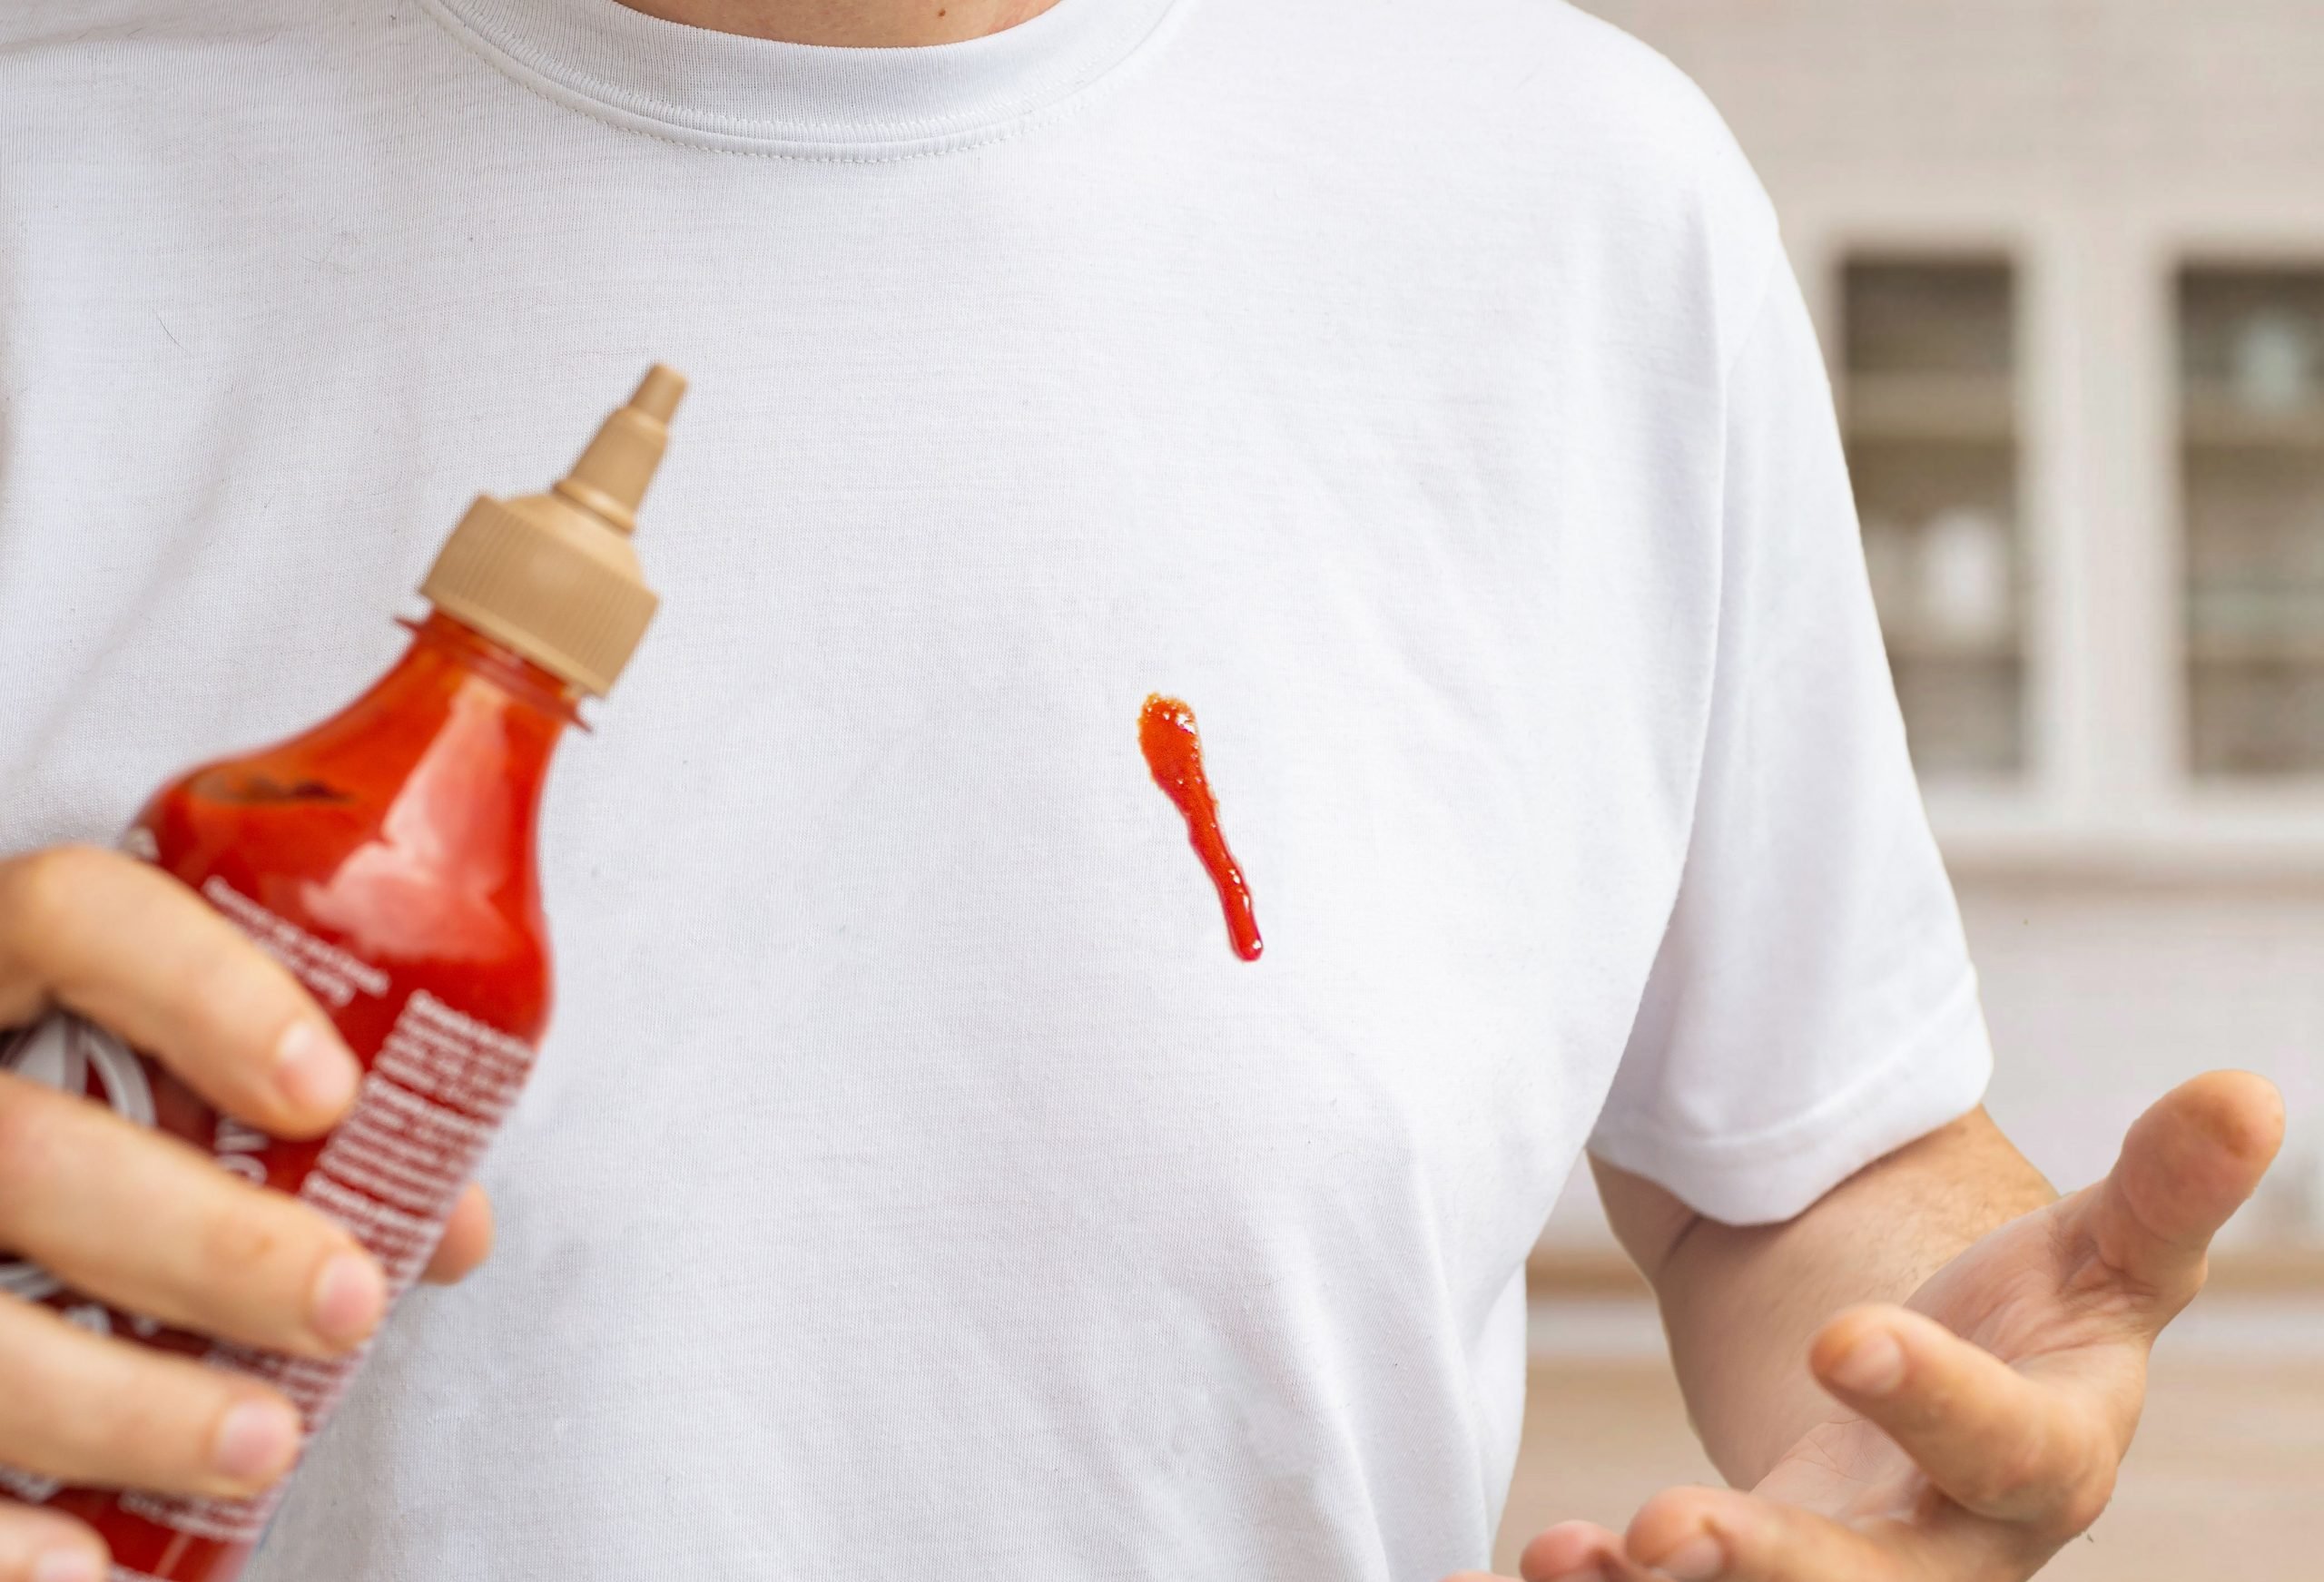 How to Remove Hot Sauce Stains From Clothes and More